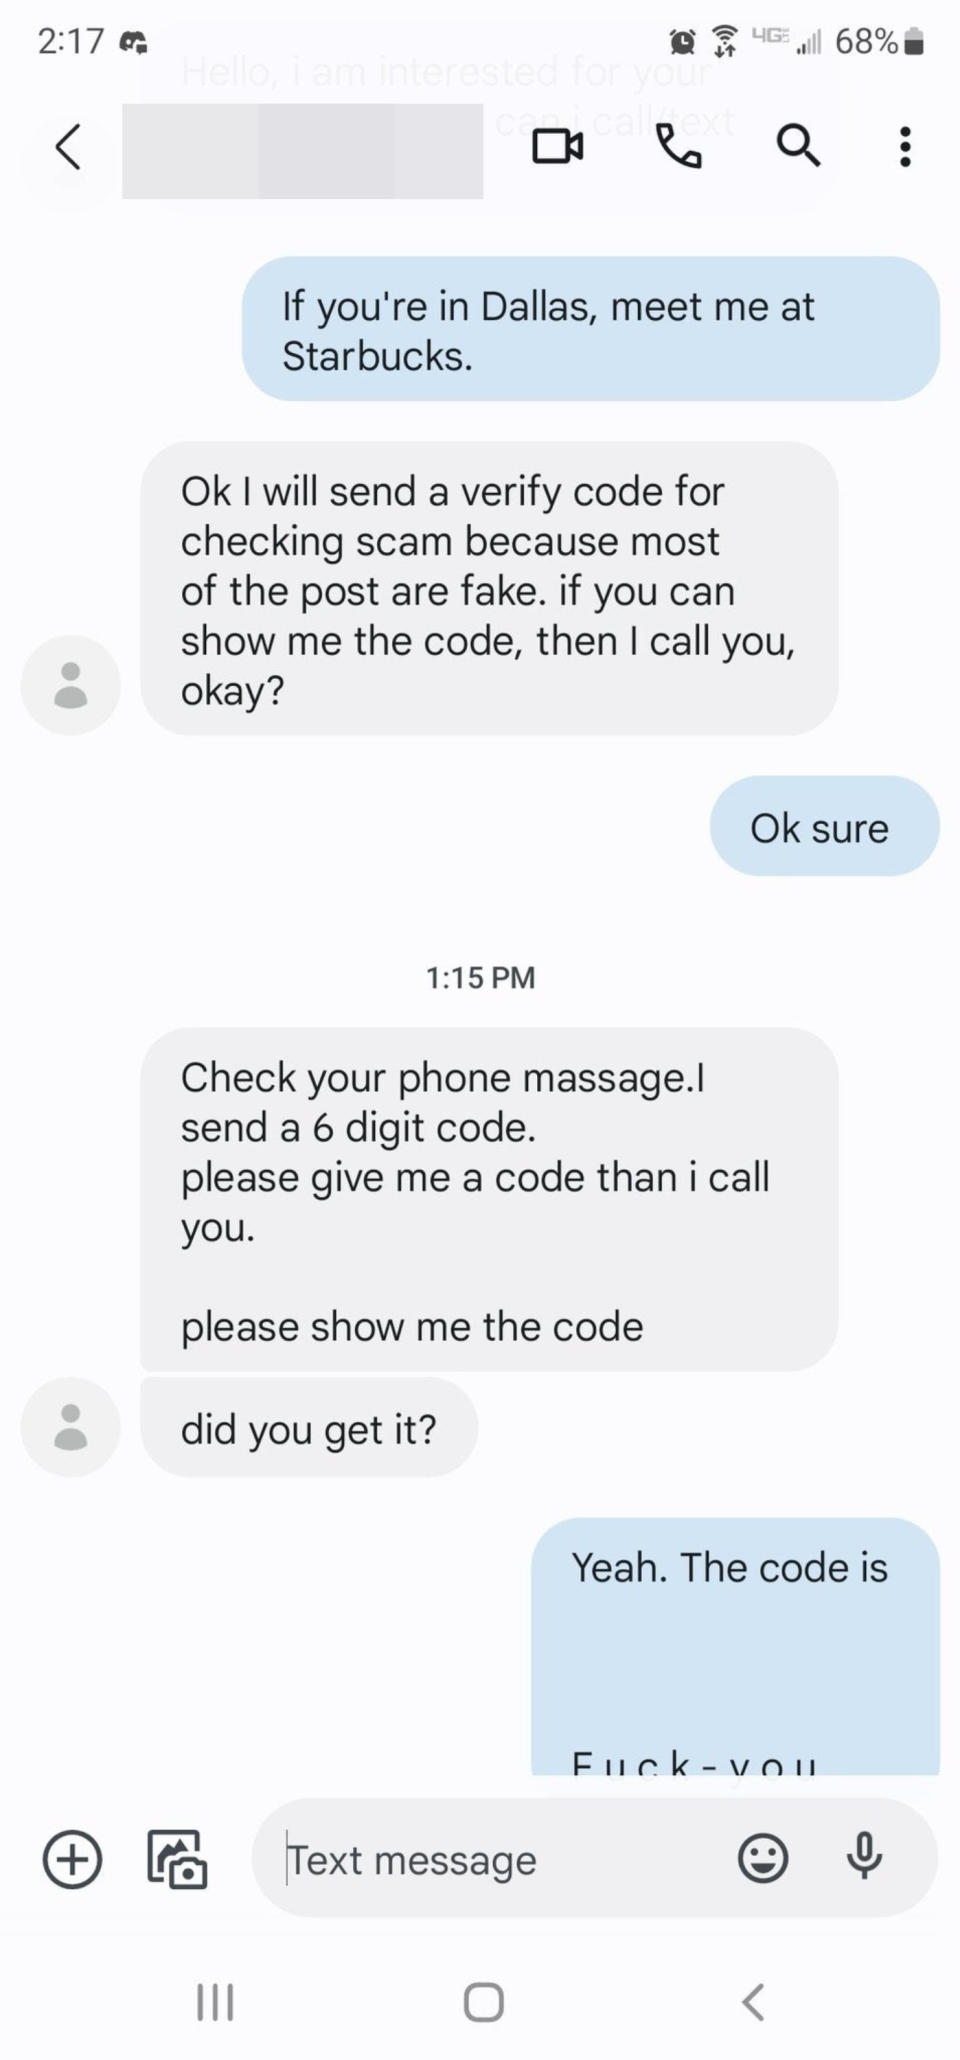 Scammer who asks for a 6-digit code and gets sent "fuck you"